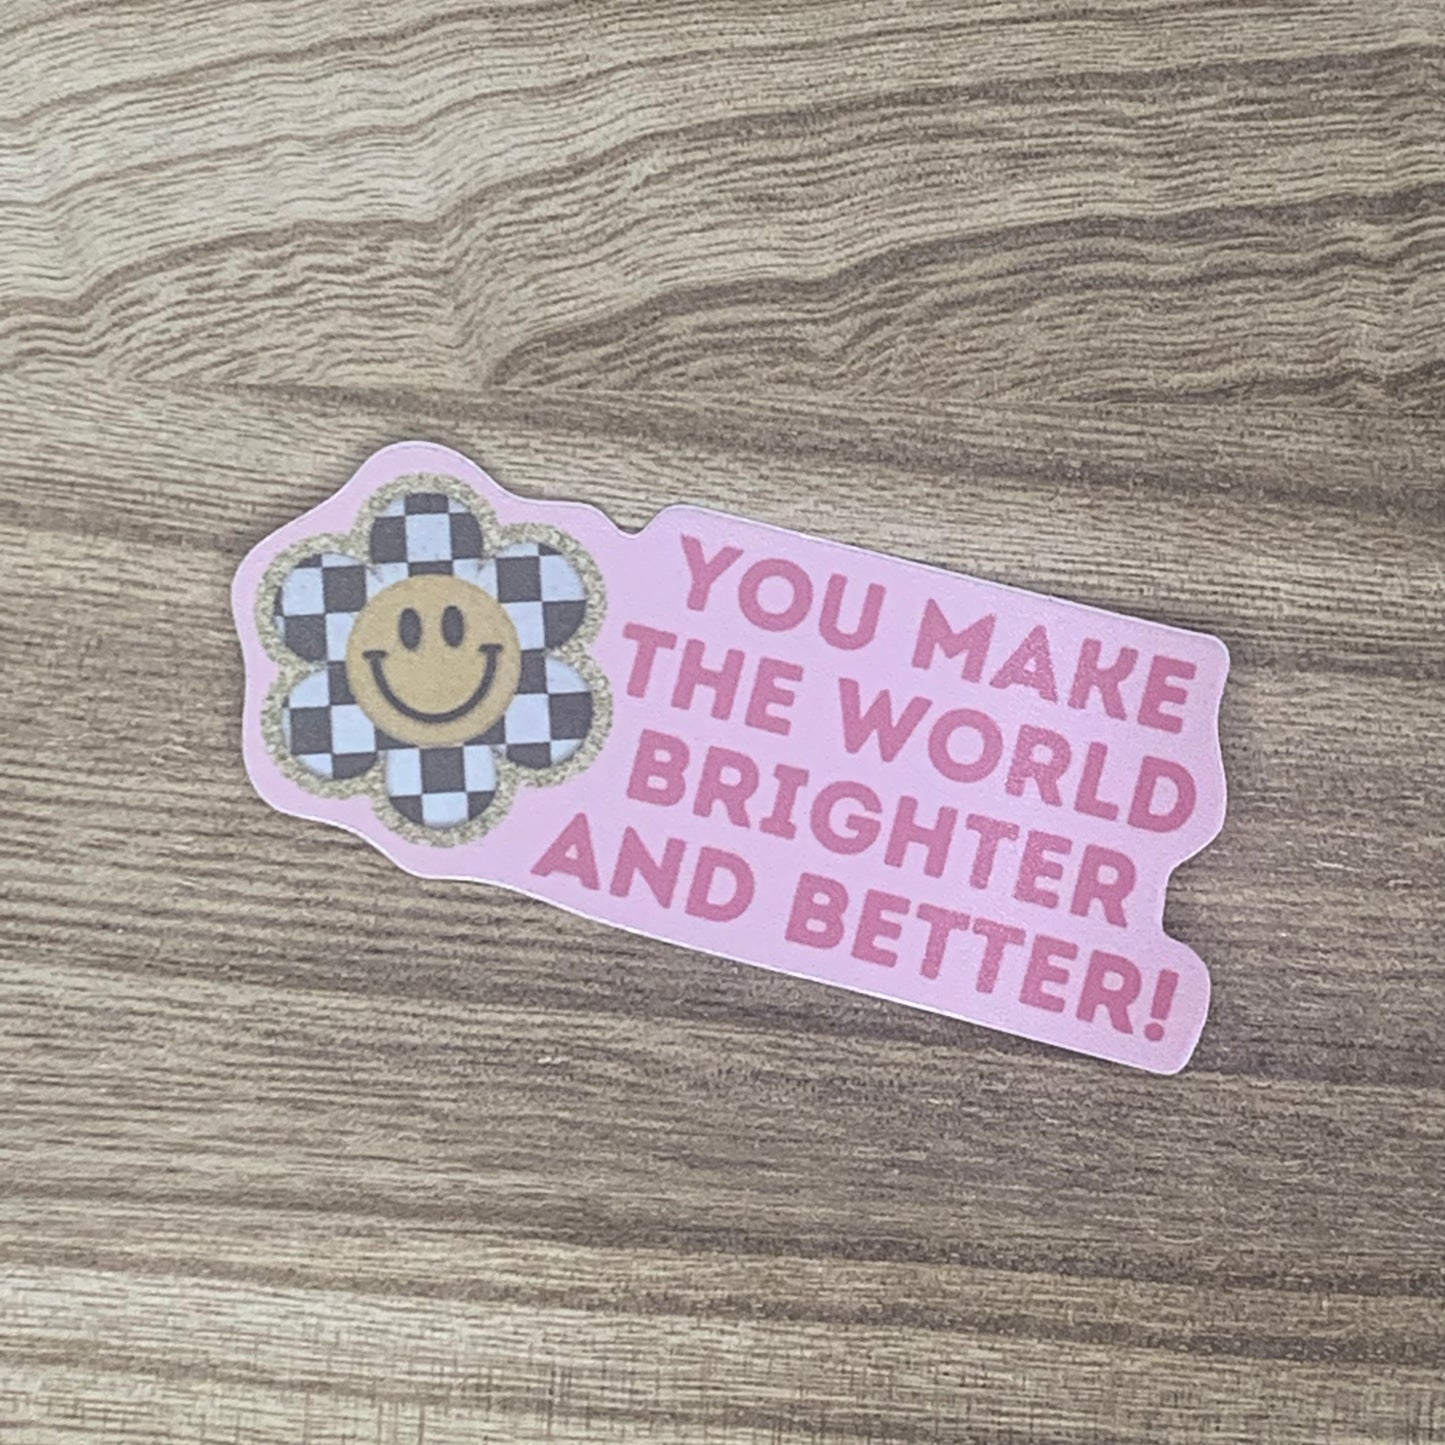 You Make the World Brighter and Better - Affirmation Sticker